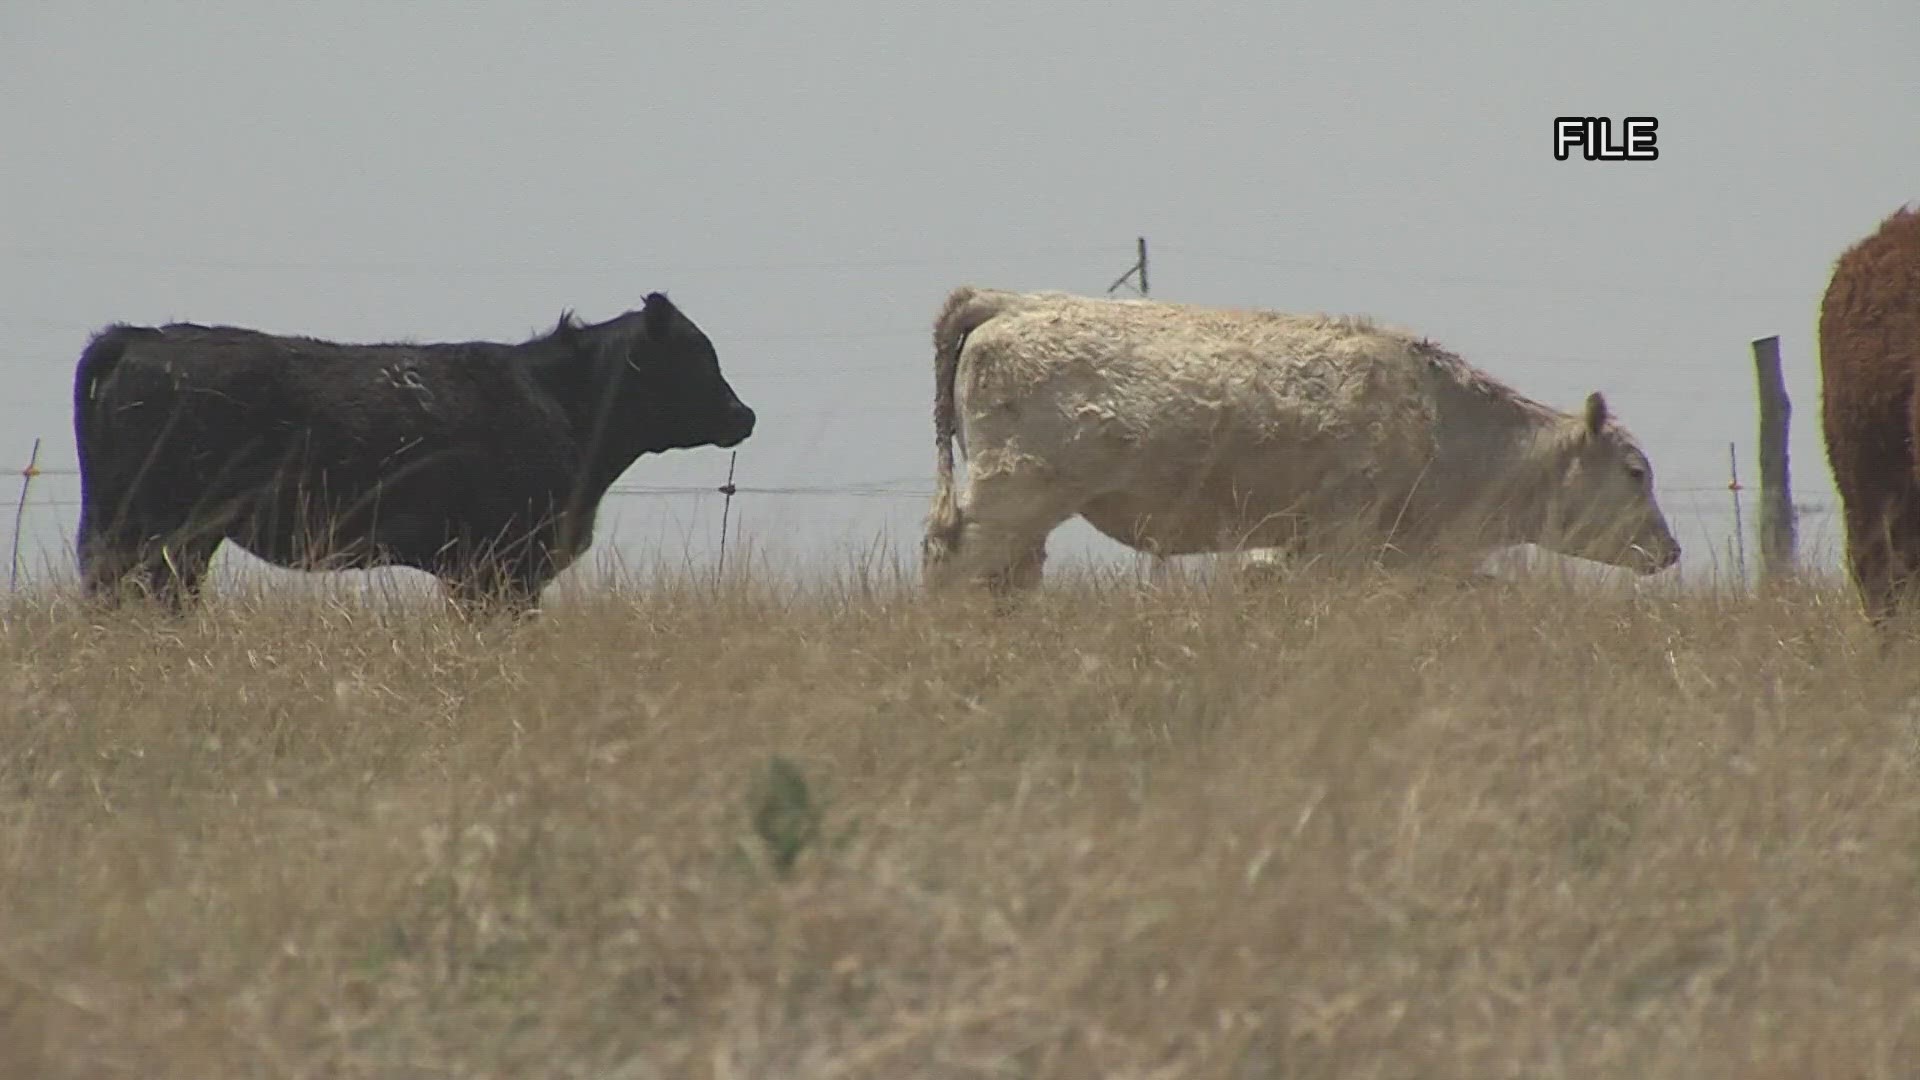 Fires across the Panhandle have ruined grasslands that cattle use for grazing.